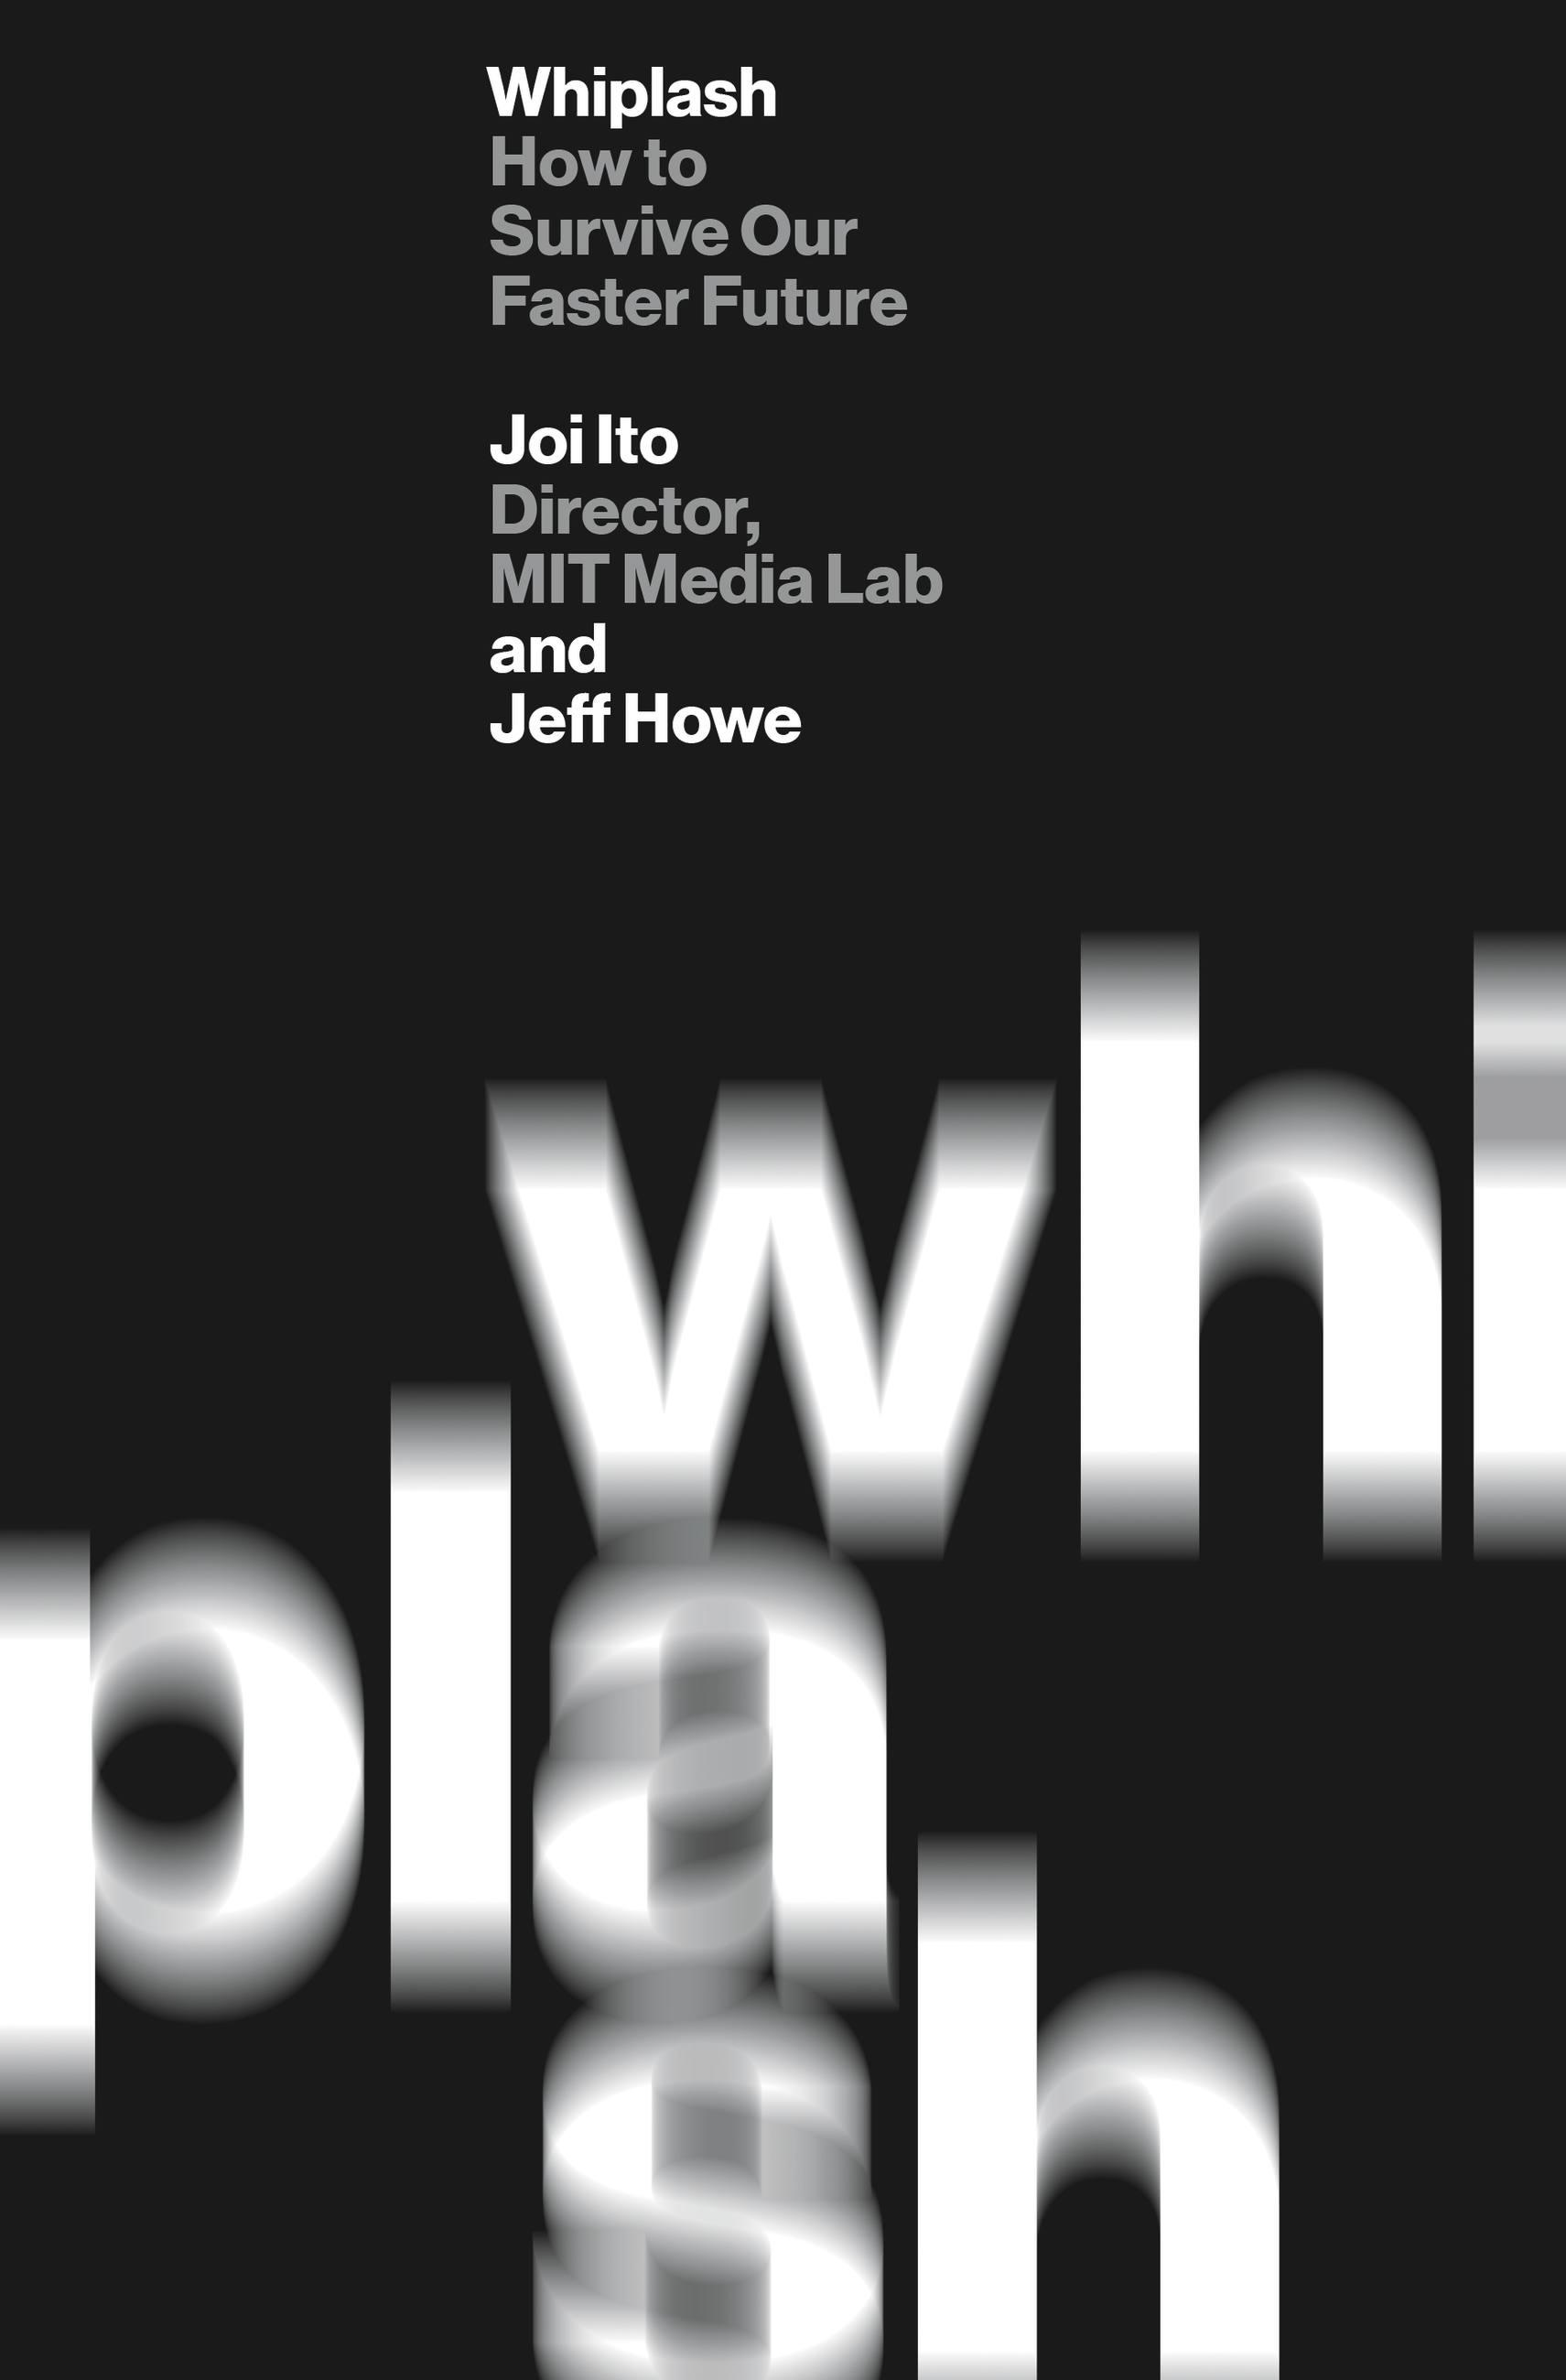 Whiplash: How to Survive Our Faster Future - Ito, Joi Howe, Jeff